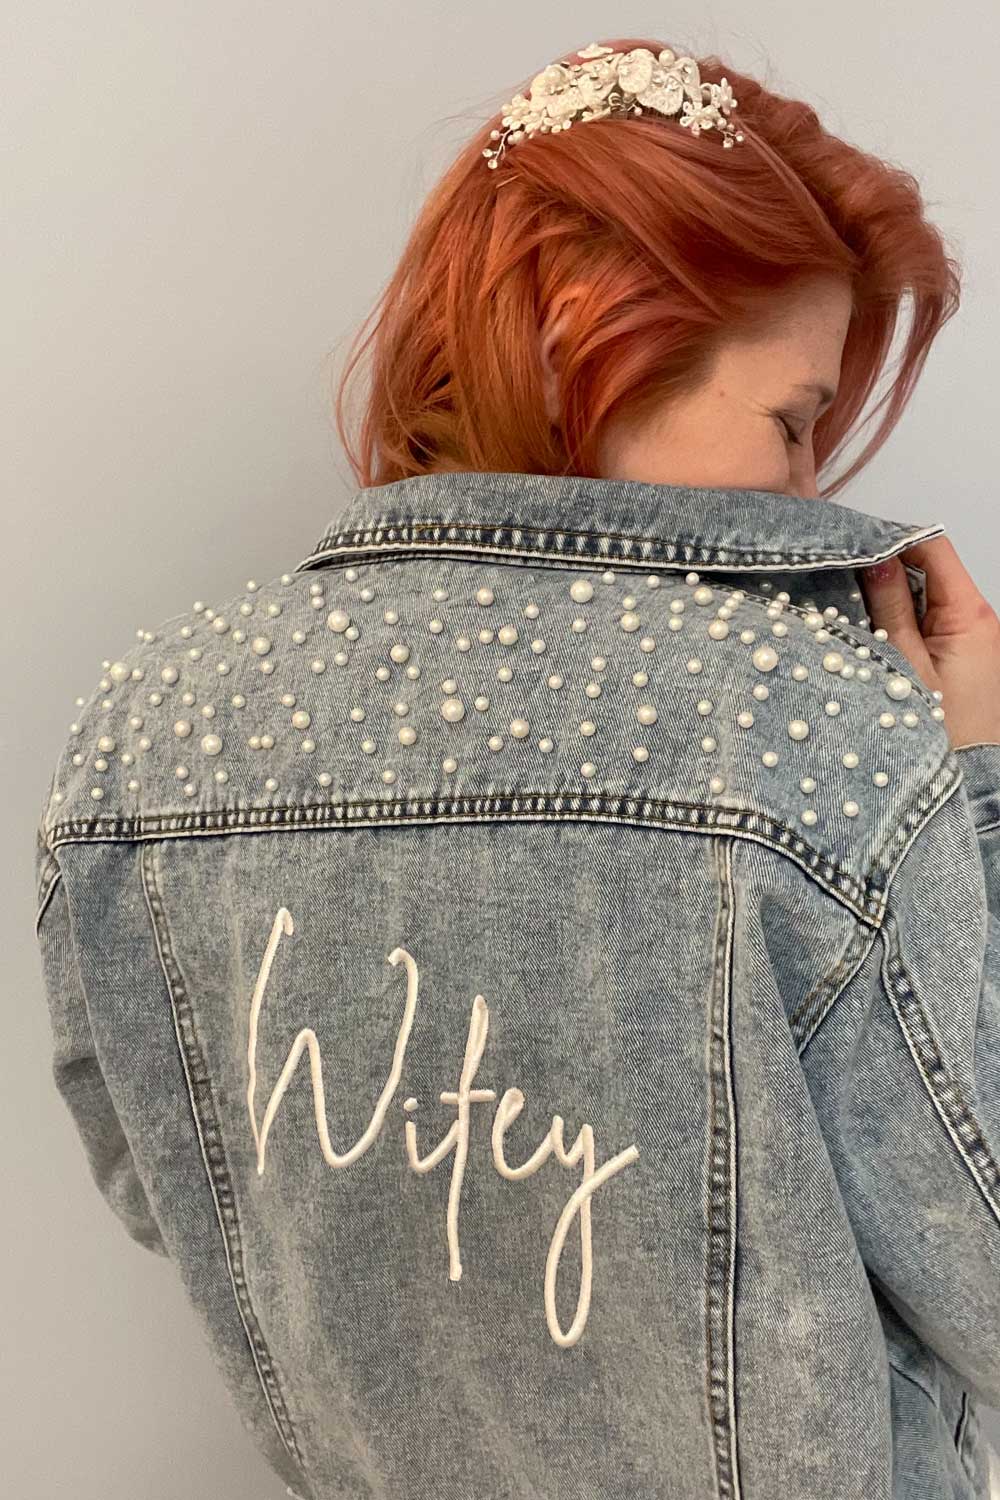 A woman wearing a denim jacket with the word wifey on it, walking into a bridal salon.